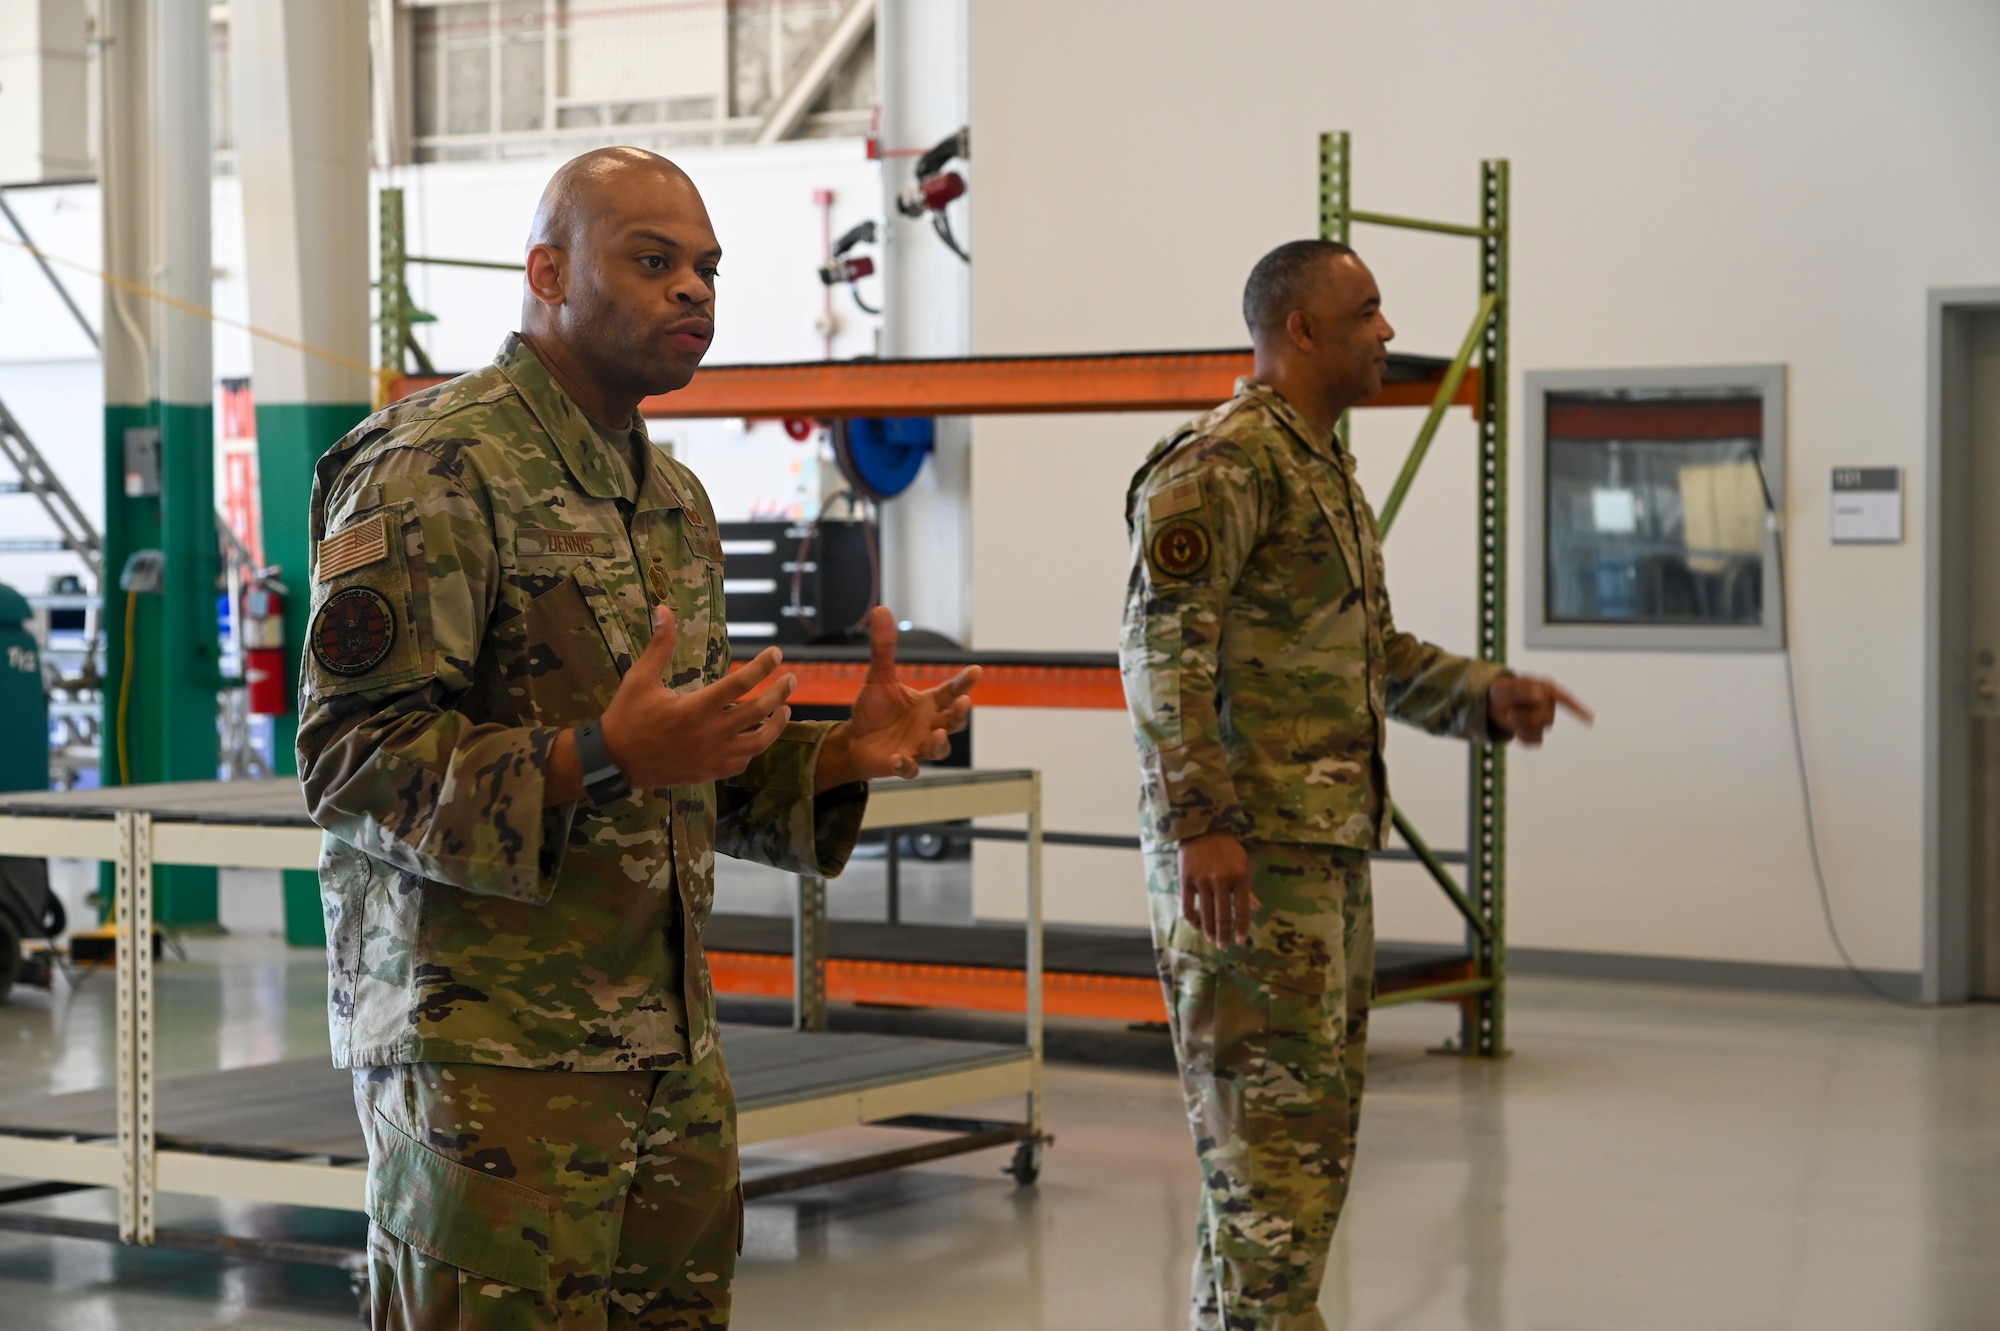 Chief Master Sgt. Timothy C. White Jr., command chief master sergeant, and Chief Master Sgt. Travon W. Dennis, command first sergeant, both from Air Force Reserve Command, Robins Air Force Base, Georgia, speak with 940th Air Refueling Wing maintainers June 12, 2021, at Beale AFB, California.